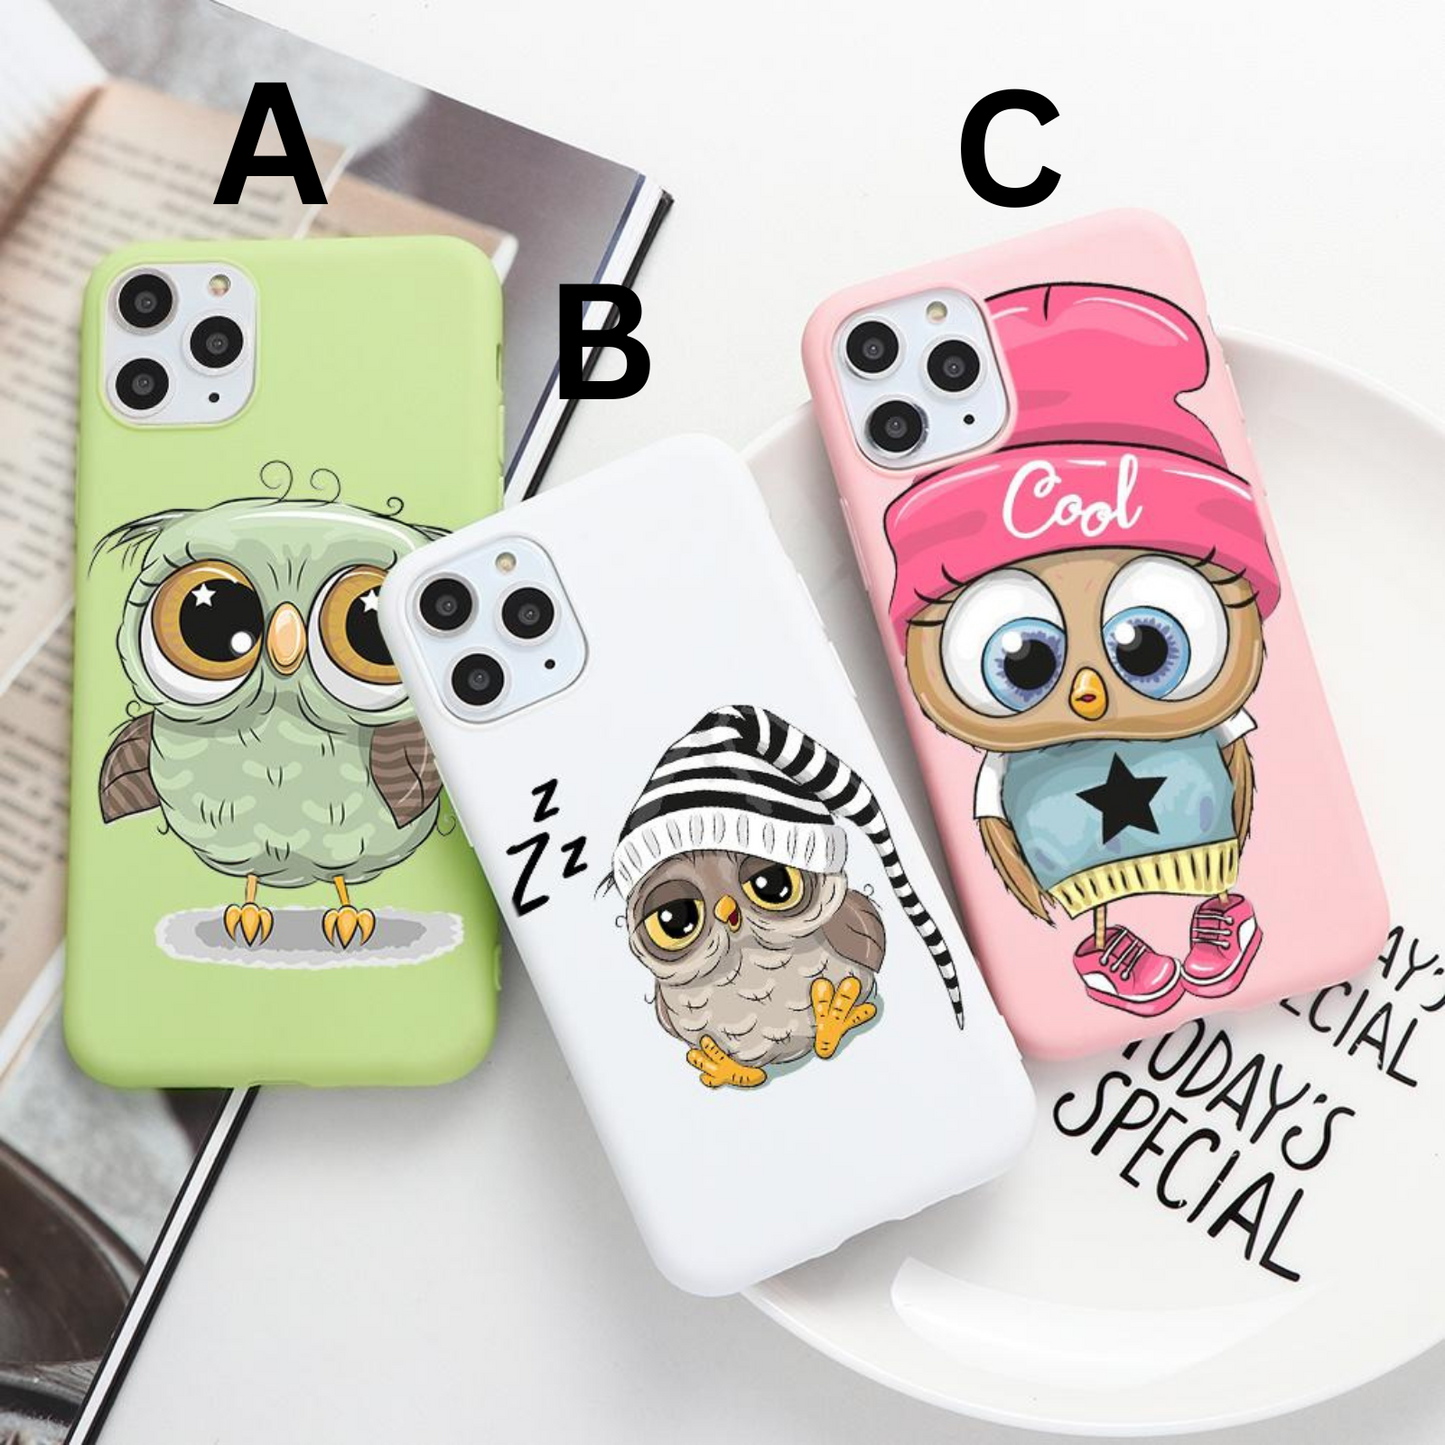 Cool smart Owl cases